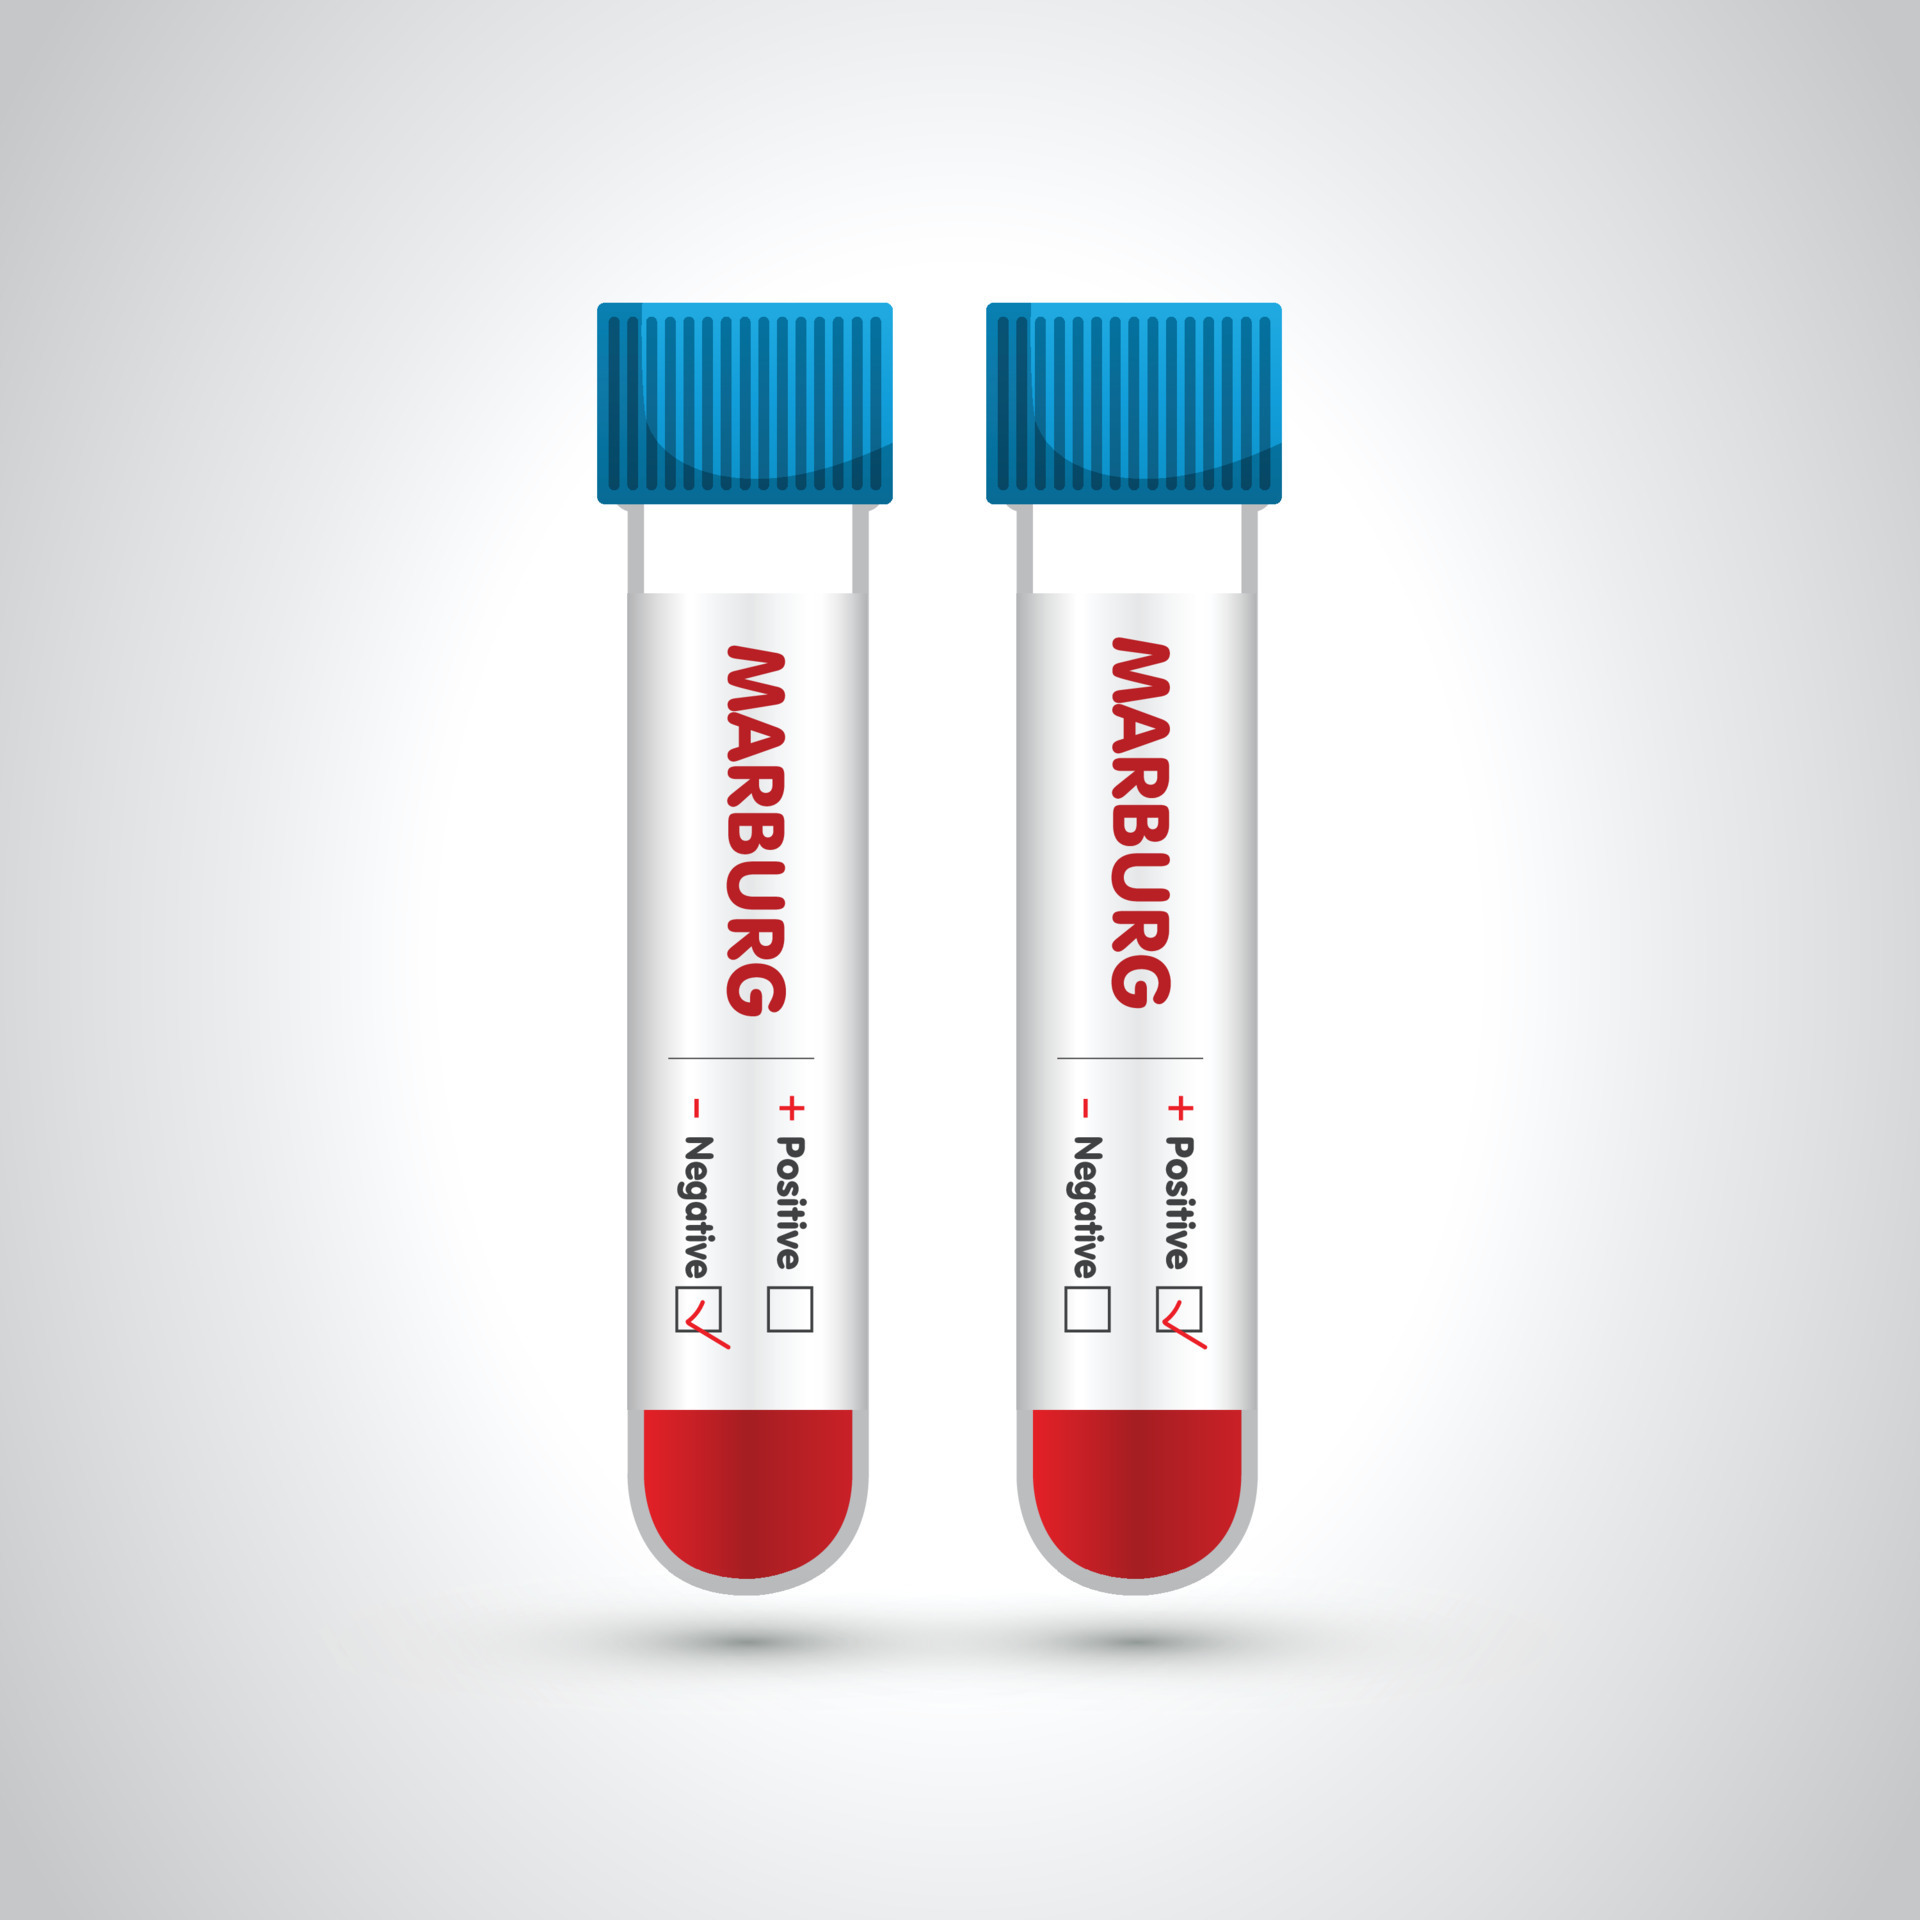 Blood sample tube for Marburg virus, Blood in the tube icon. vector illustration. the vial and test kit. It be used in medical materials, banners, posters, and magazines.